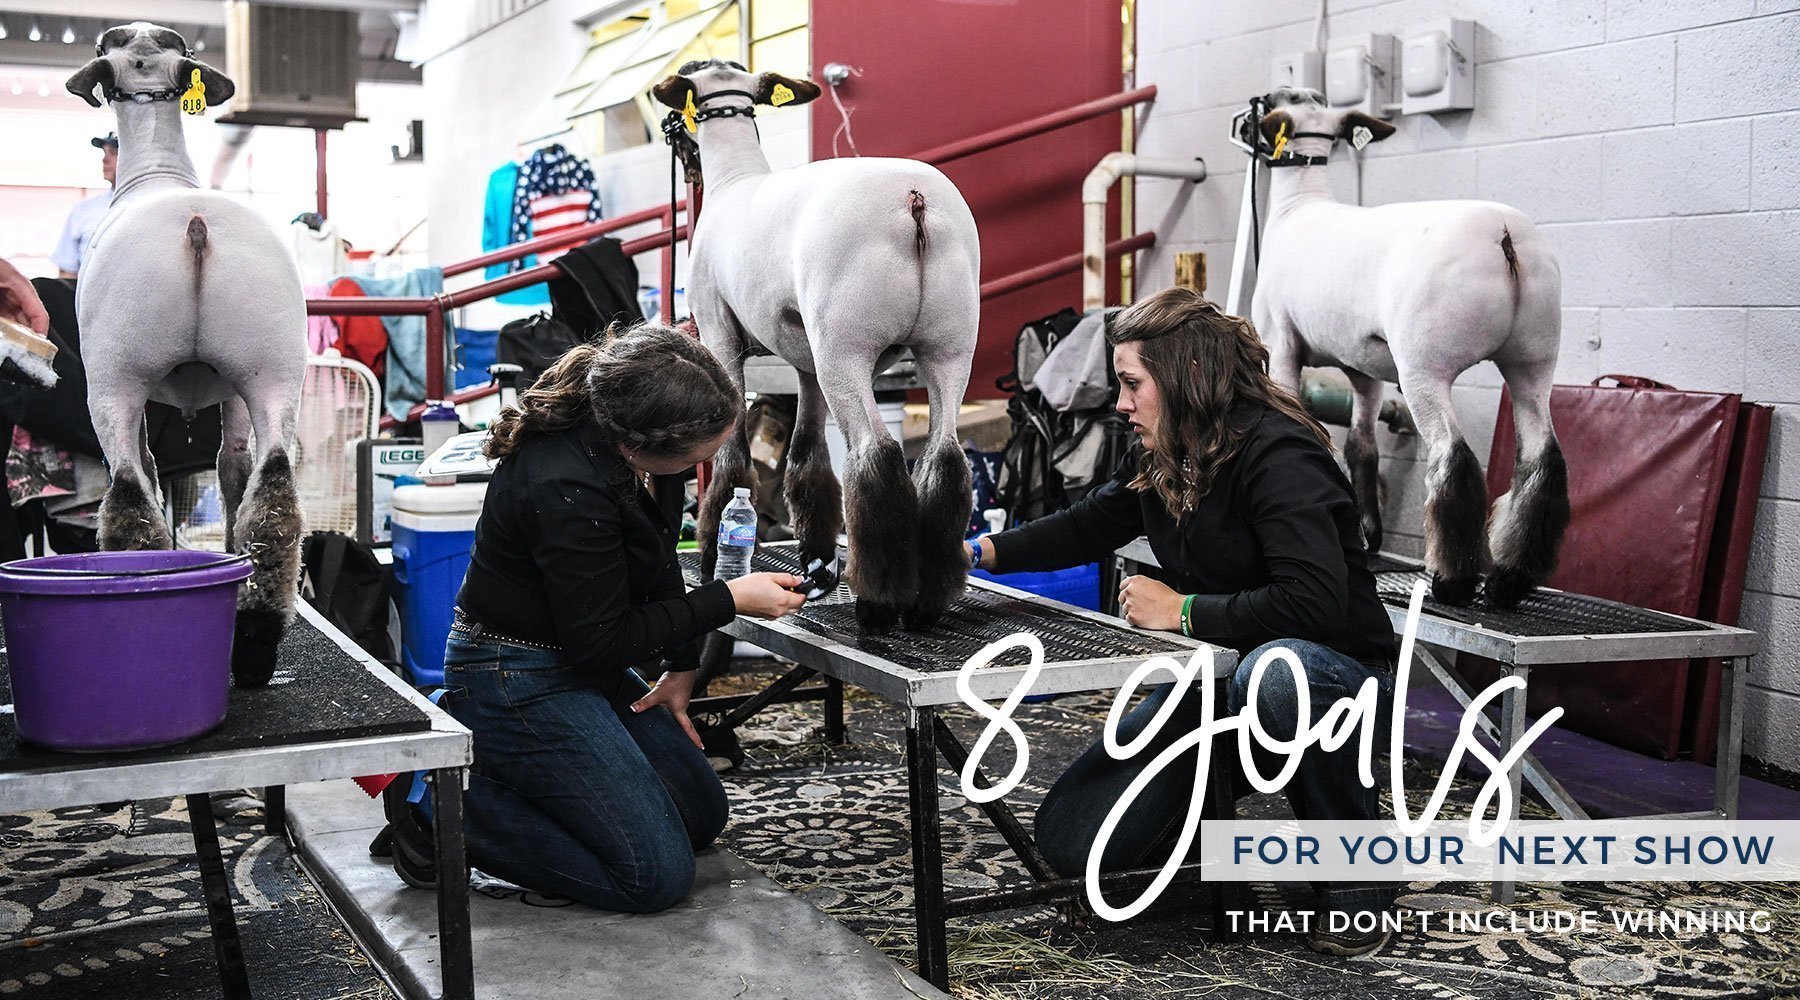 8 Goals for your next show that don't involve winning - Livestock & Co.